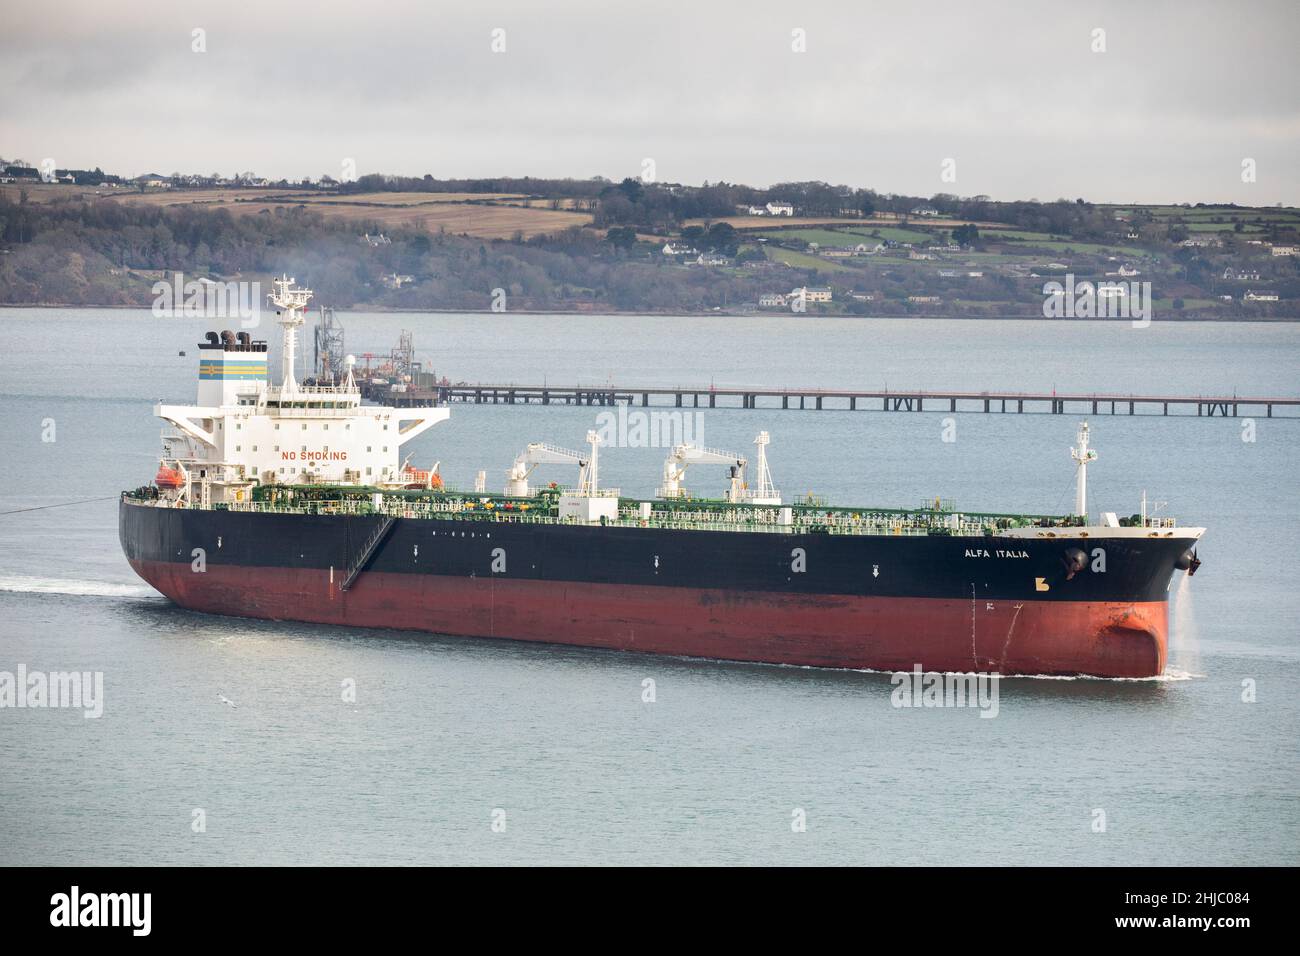 Whitegate, Cork, Ireland. 28th January, 2022.Tanker Alfa Italia departs the harbour after discharging her cargo of crude oil at Whitegate, Co. Cork, Ireland. - Credit; David Creedon / Alamy Live News Stock Photo